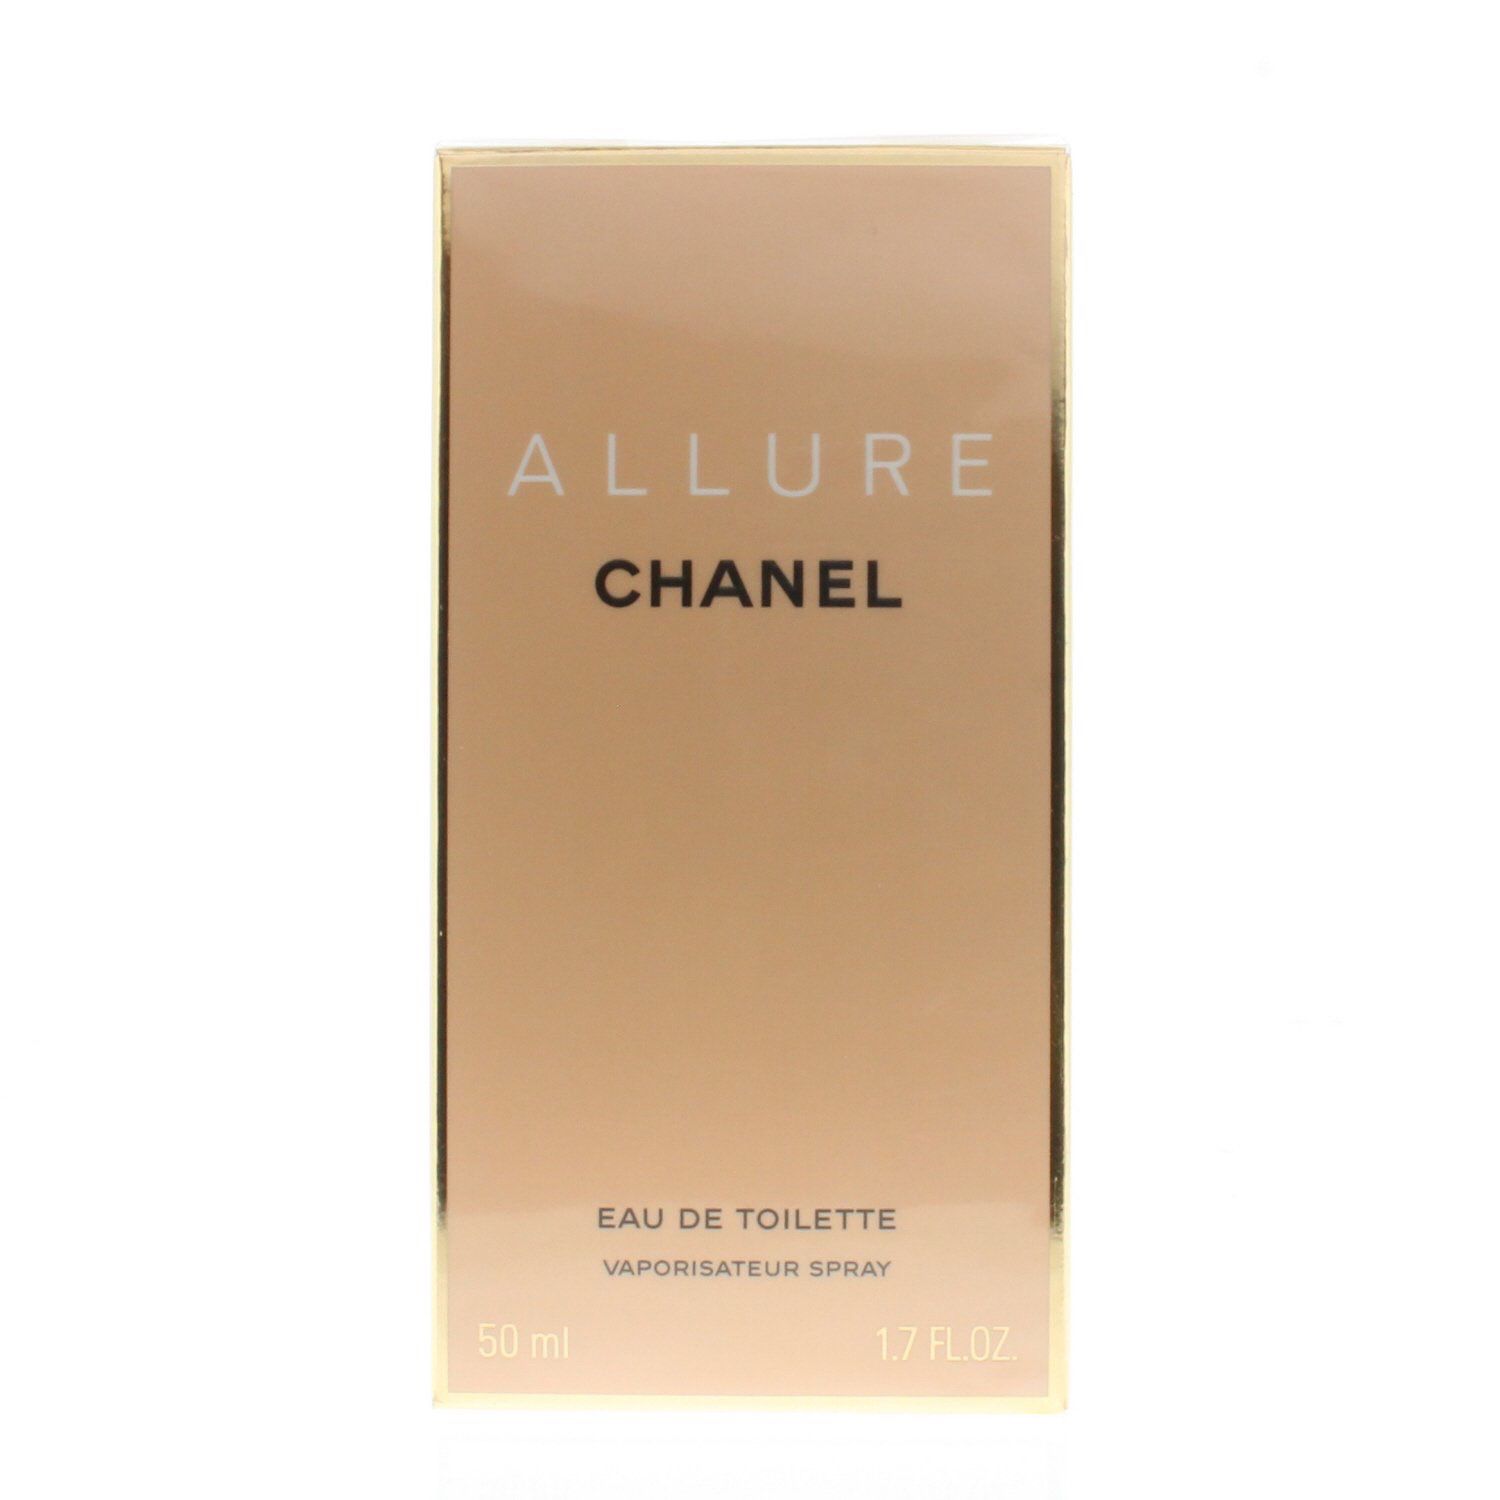 Chanel Allure Edt for Women 50ml/1.7oz for Sale in Provo, UT - OfferUp